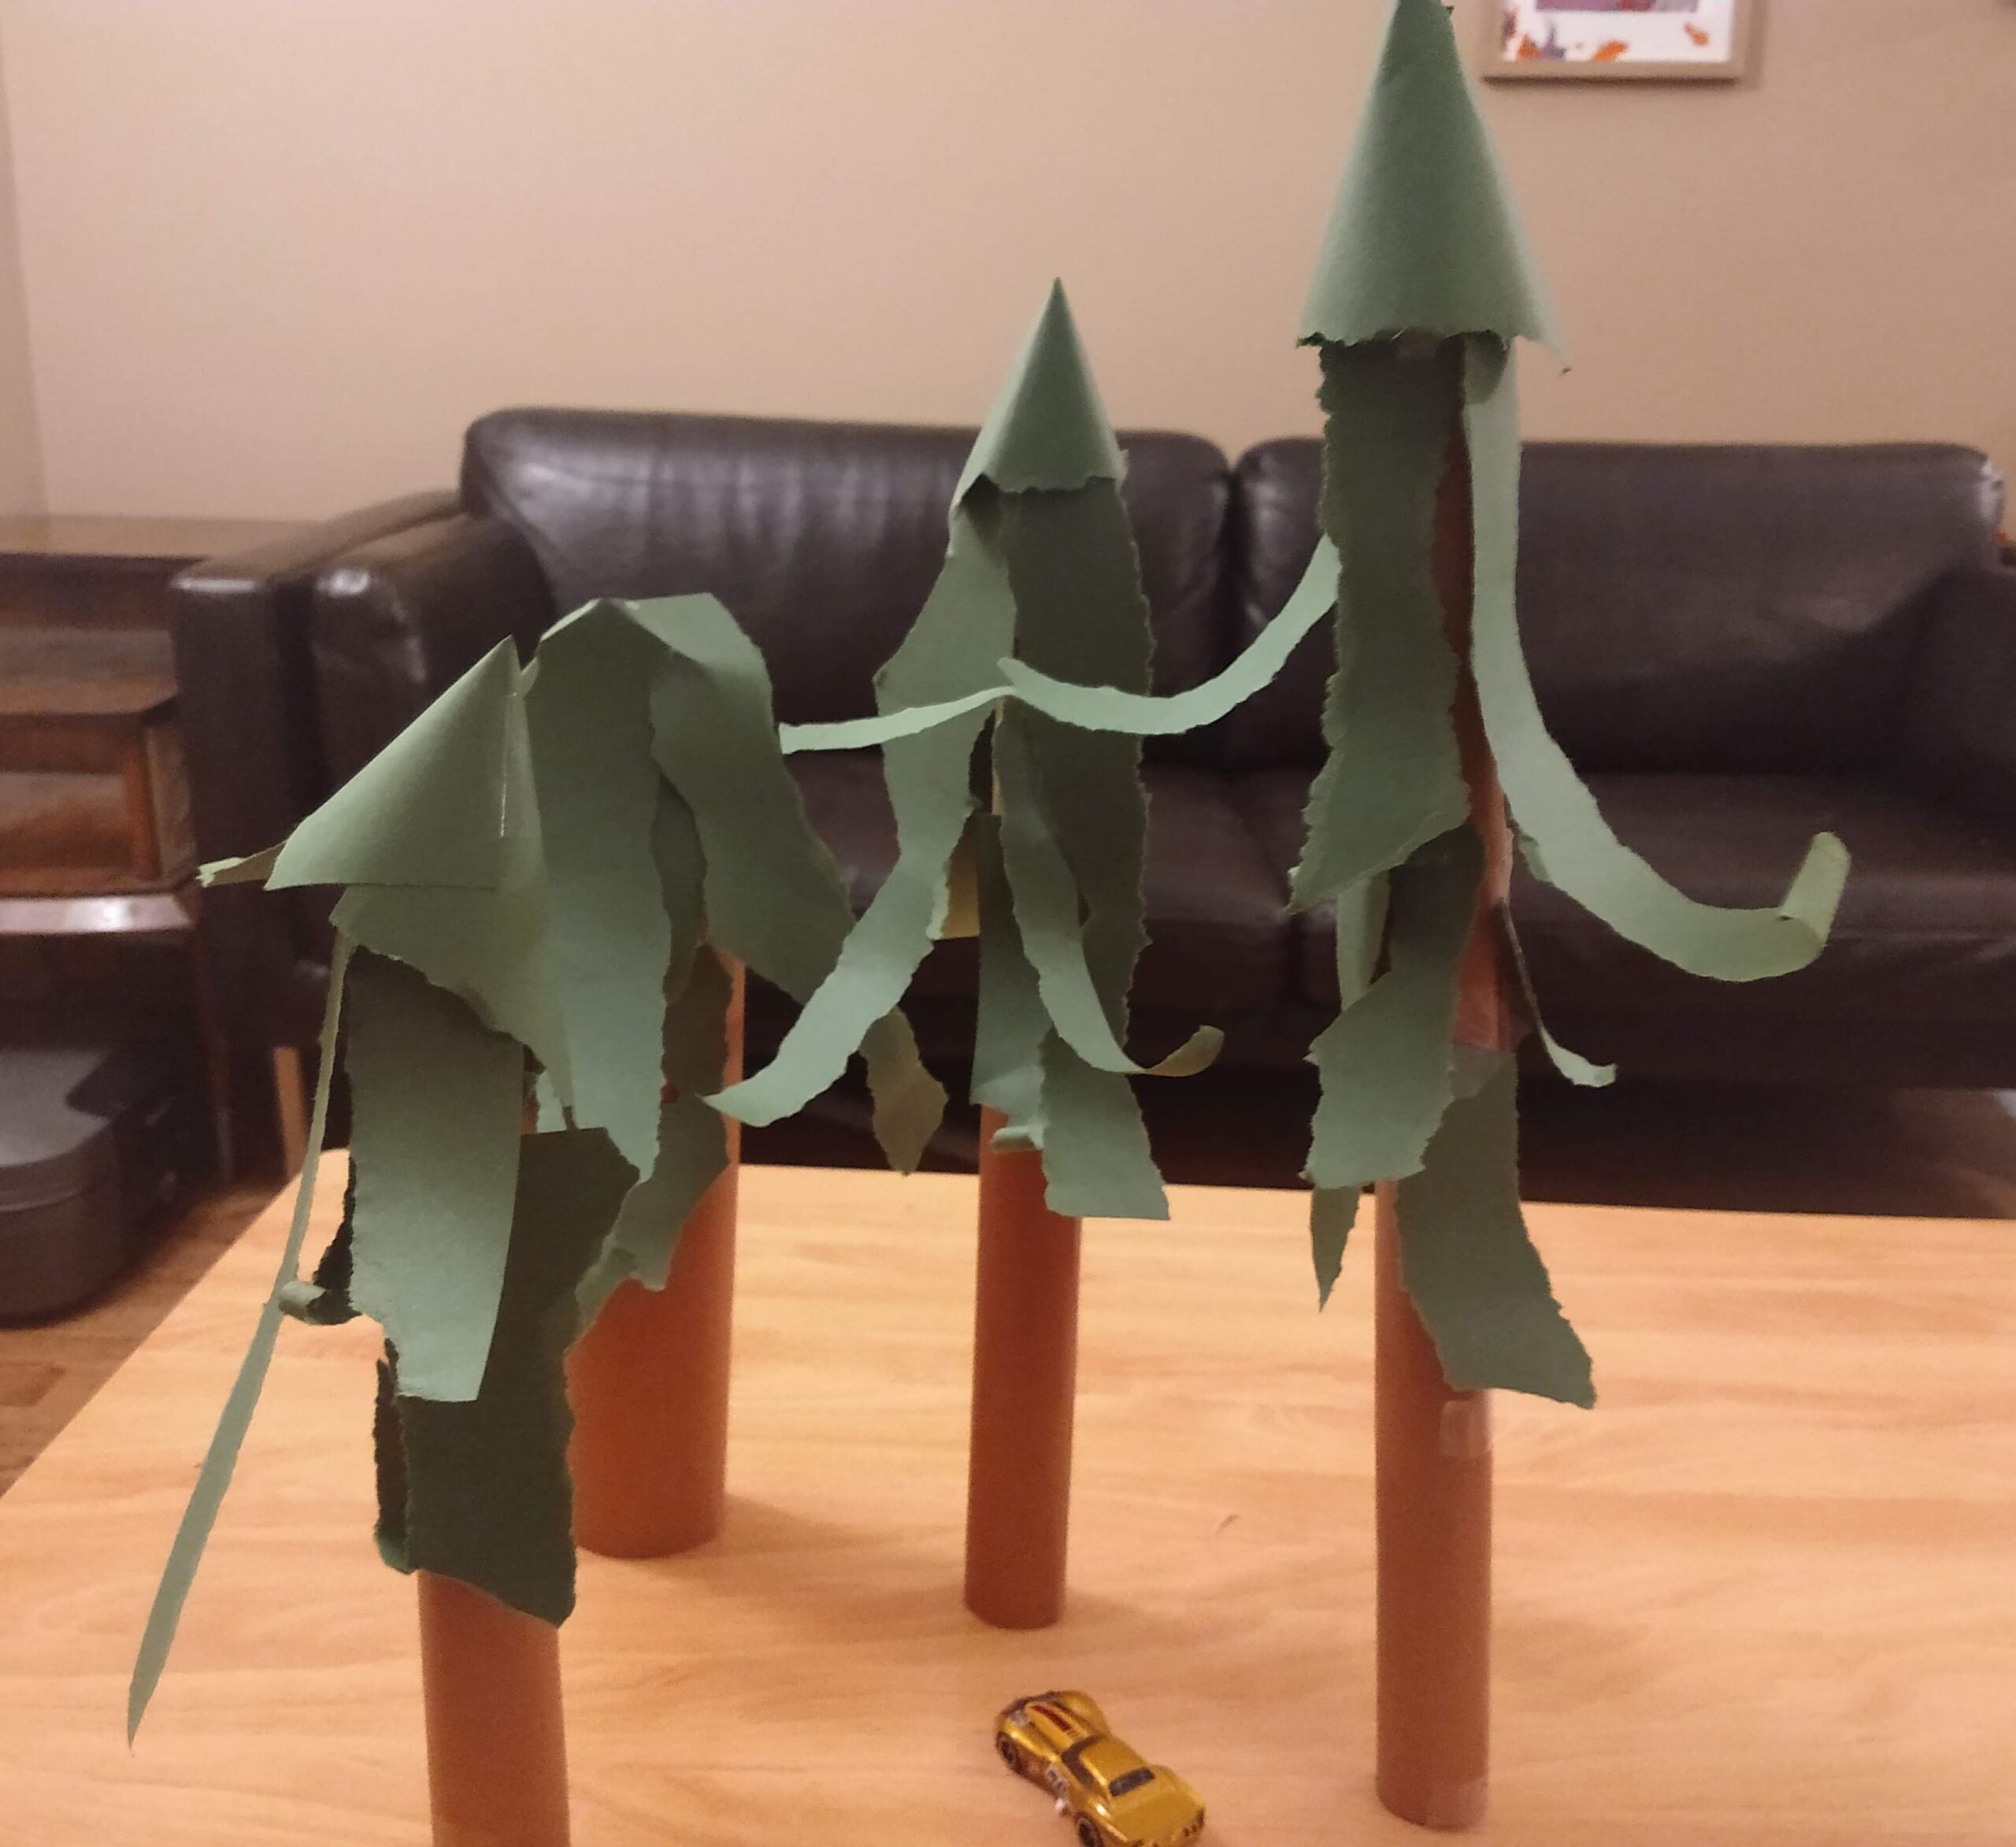 trees made from paper and paper towel rolls